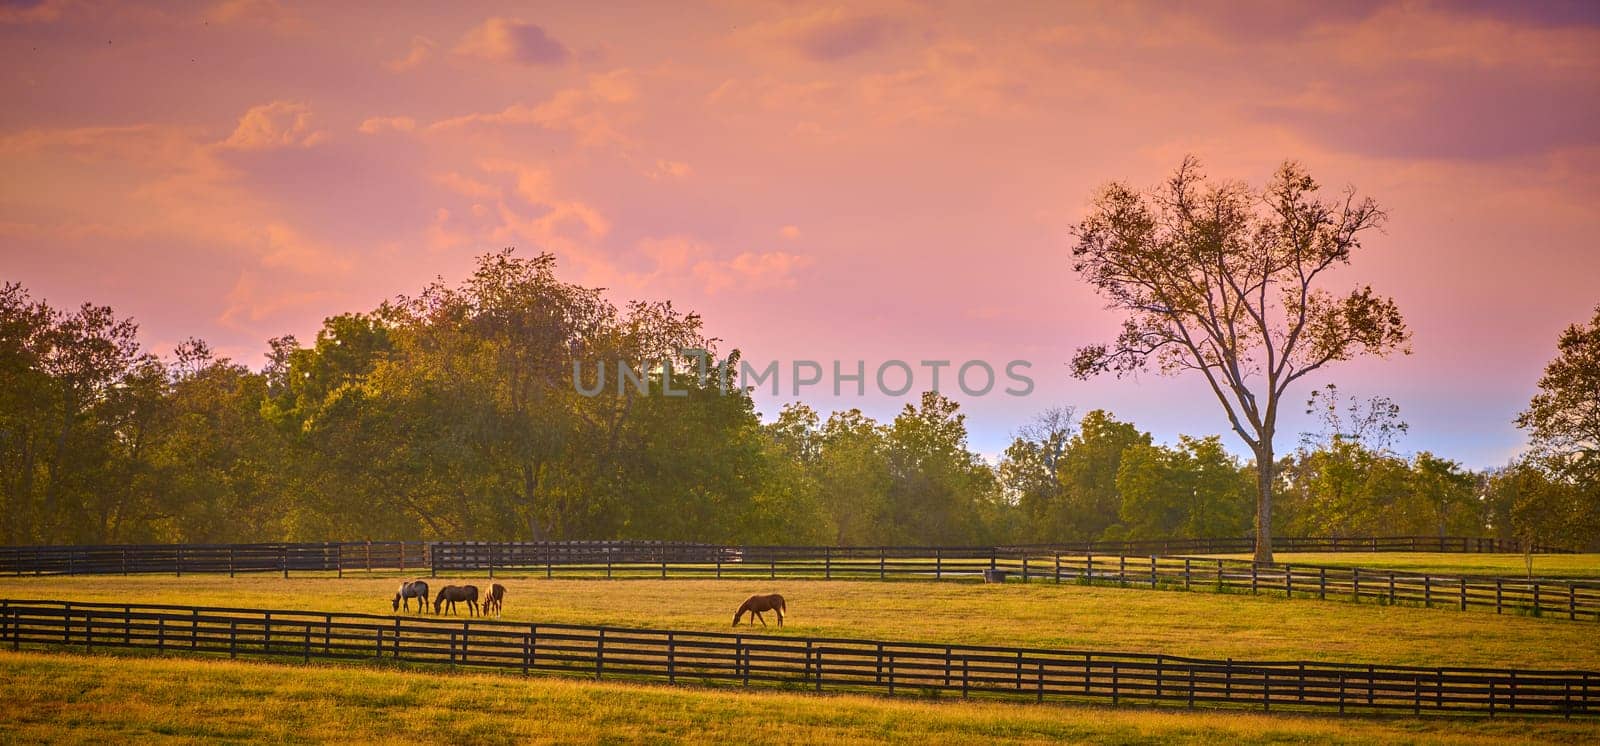 Group of horses grazing at sunset with fence. by patrickstock